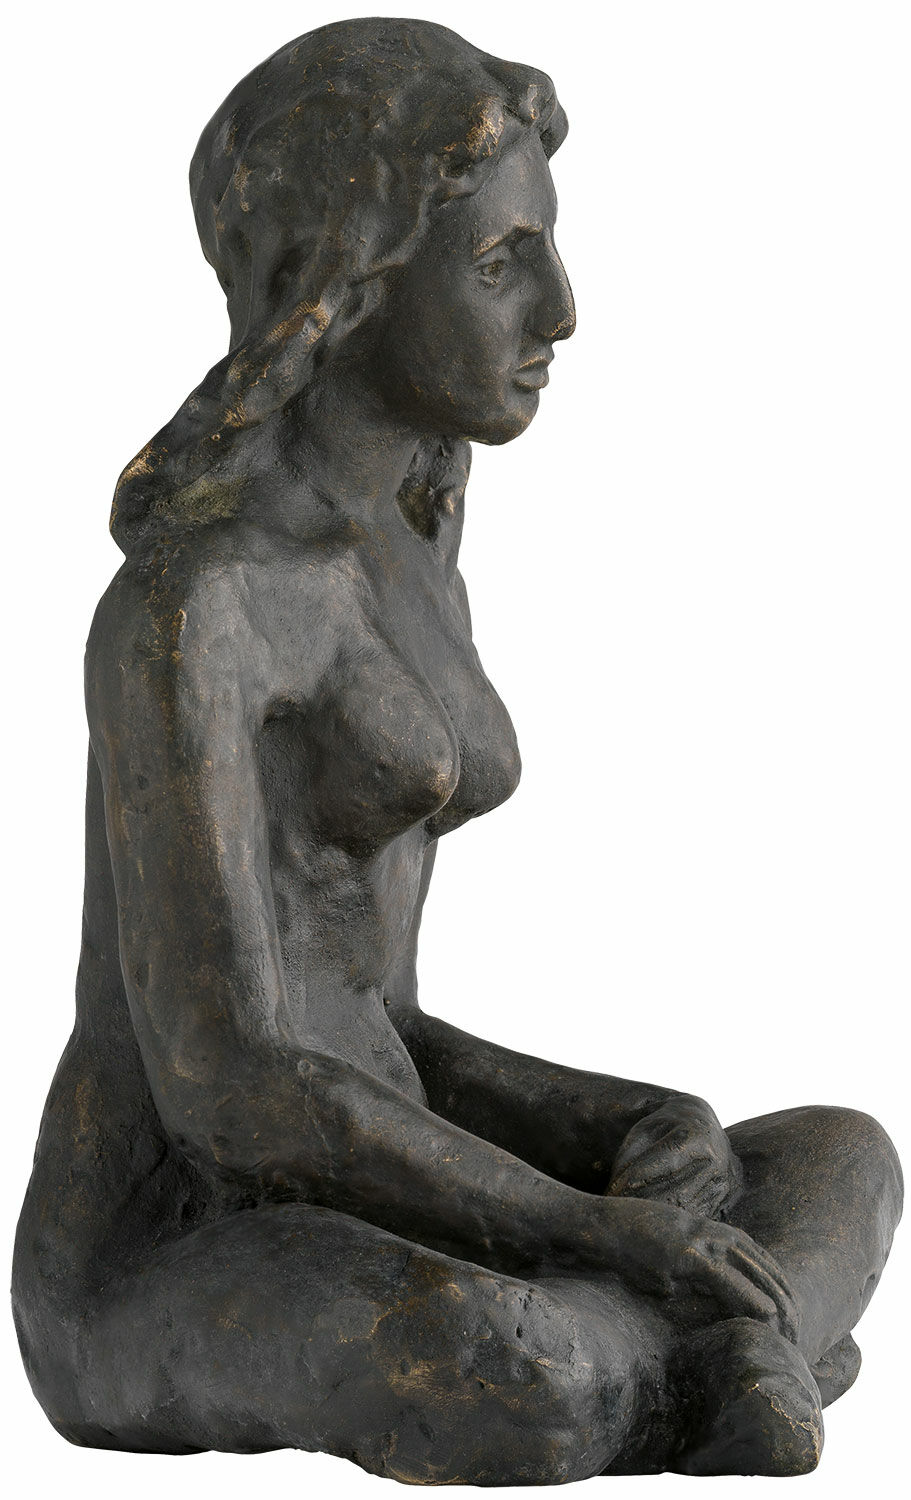 Sculpture "Seated Woman" (1912), bronze by August Macke